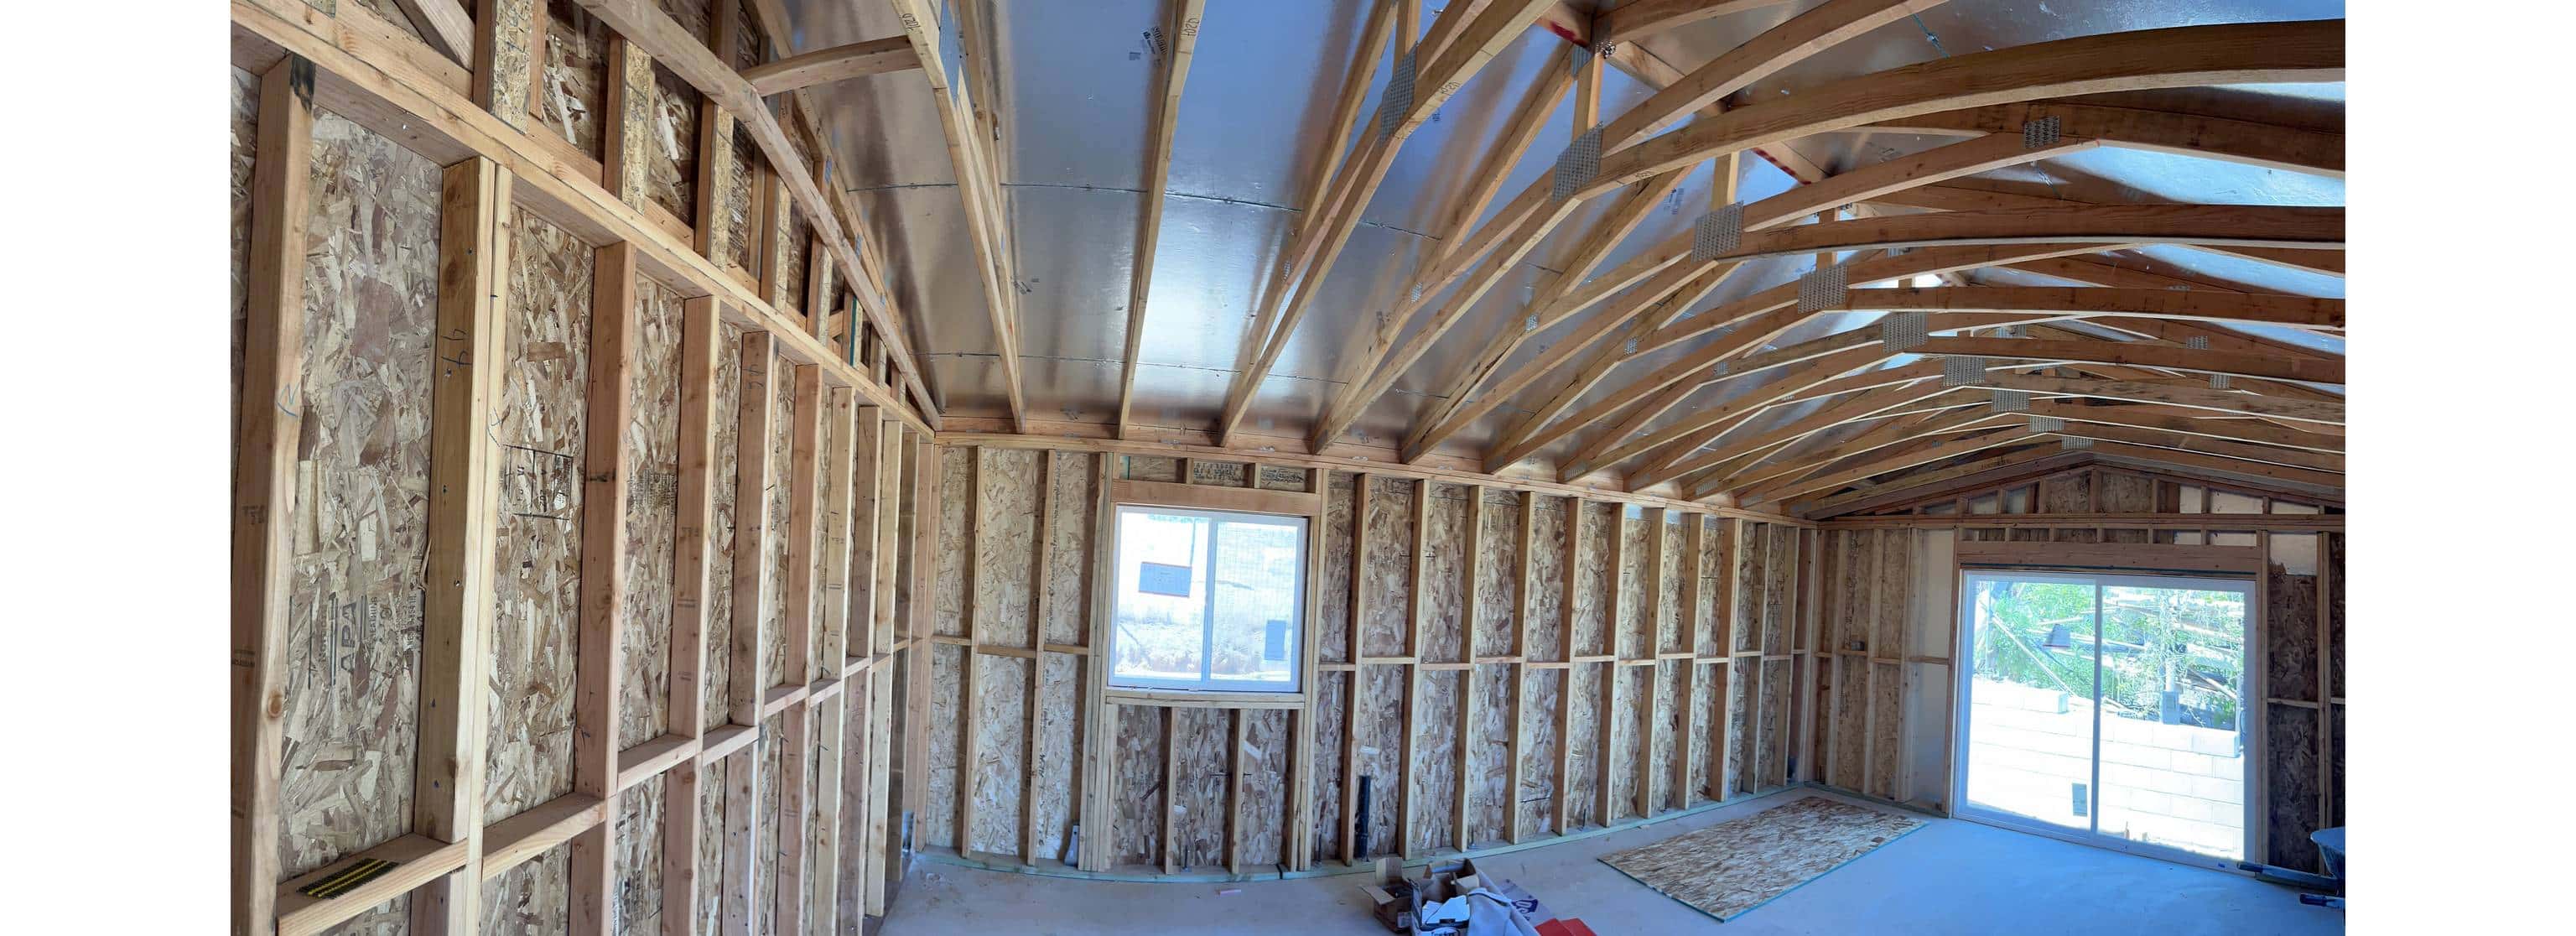 Open studs with OBS sheathing and ceiling joists